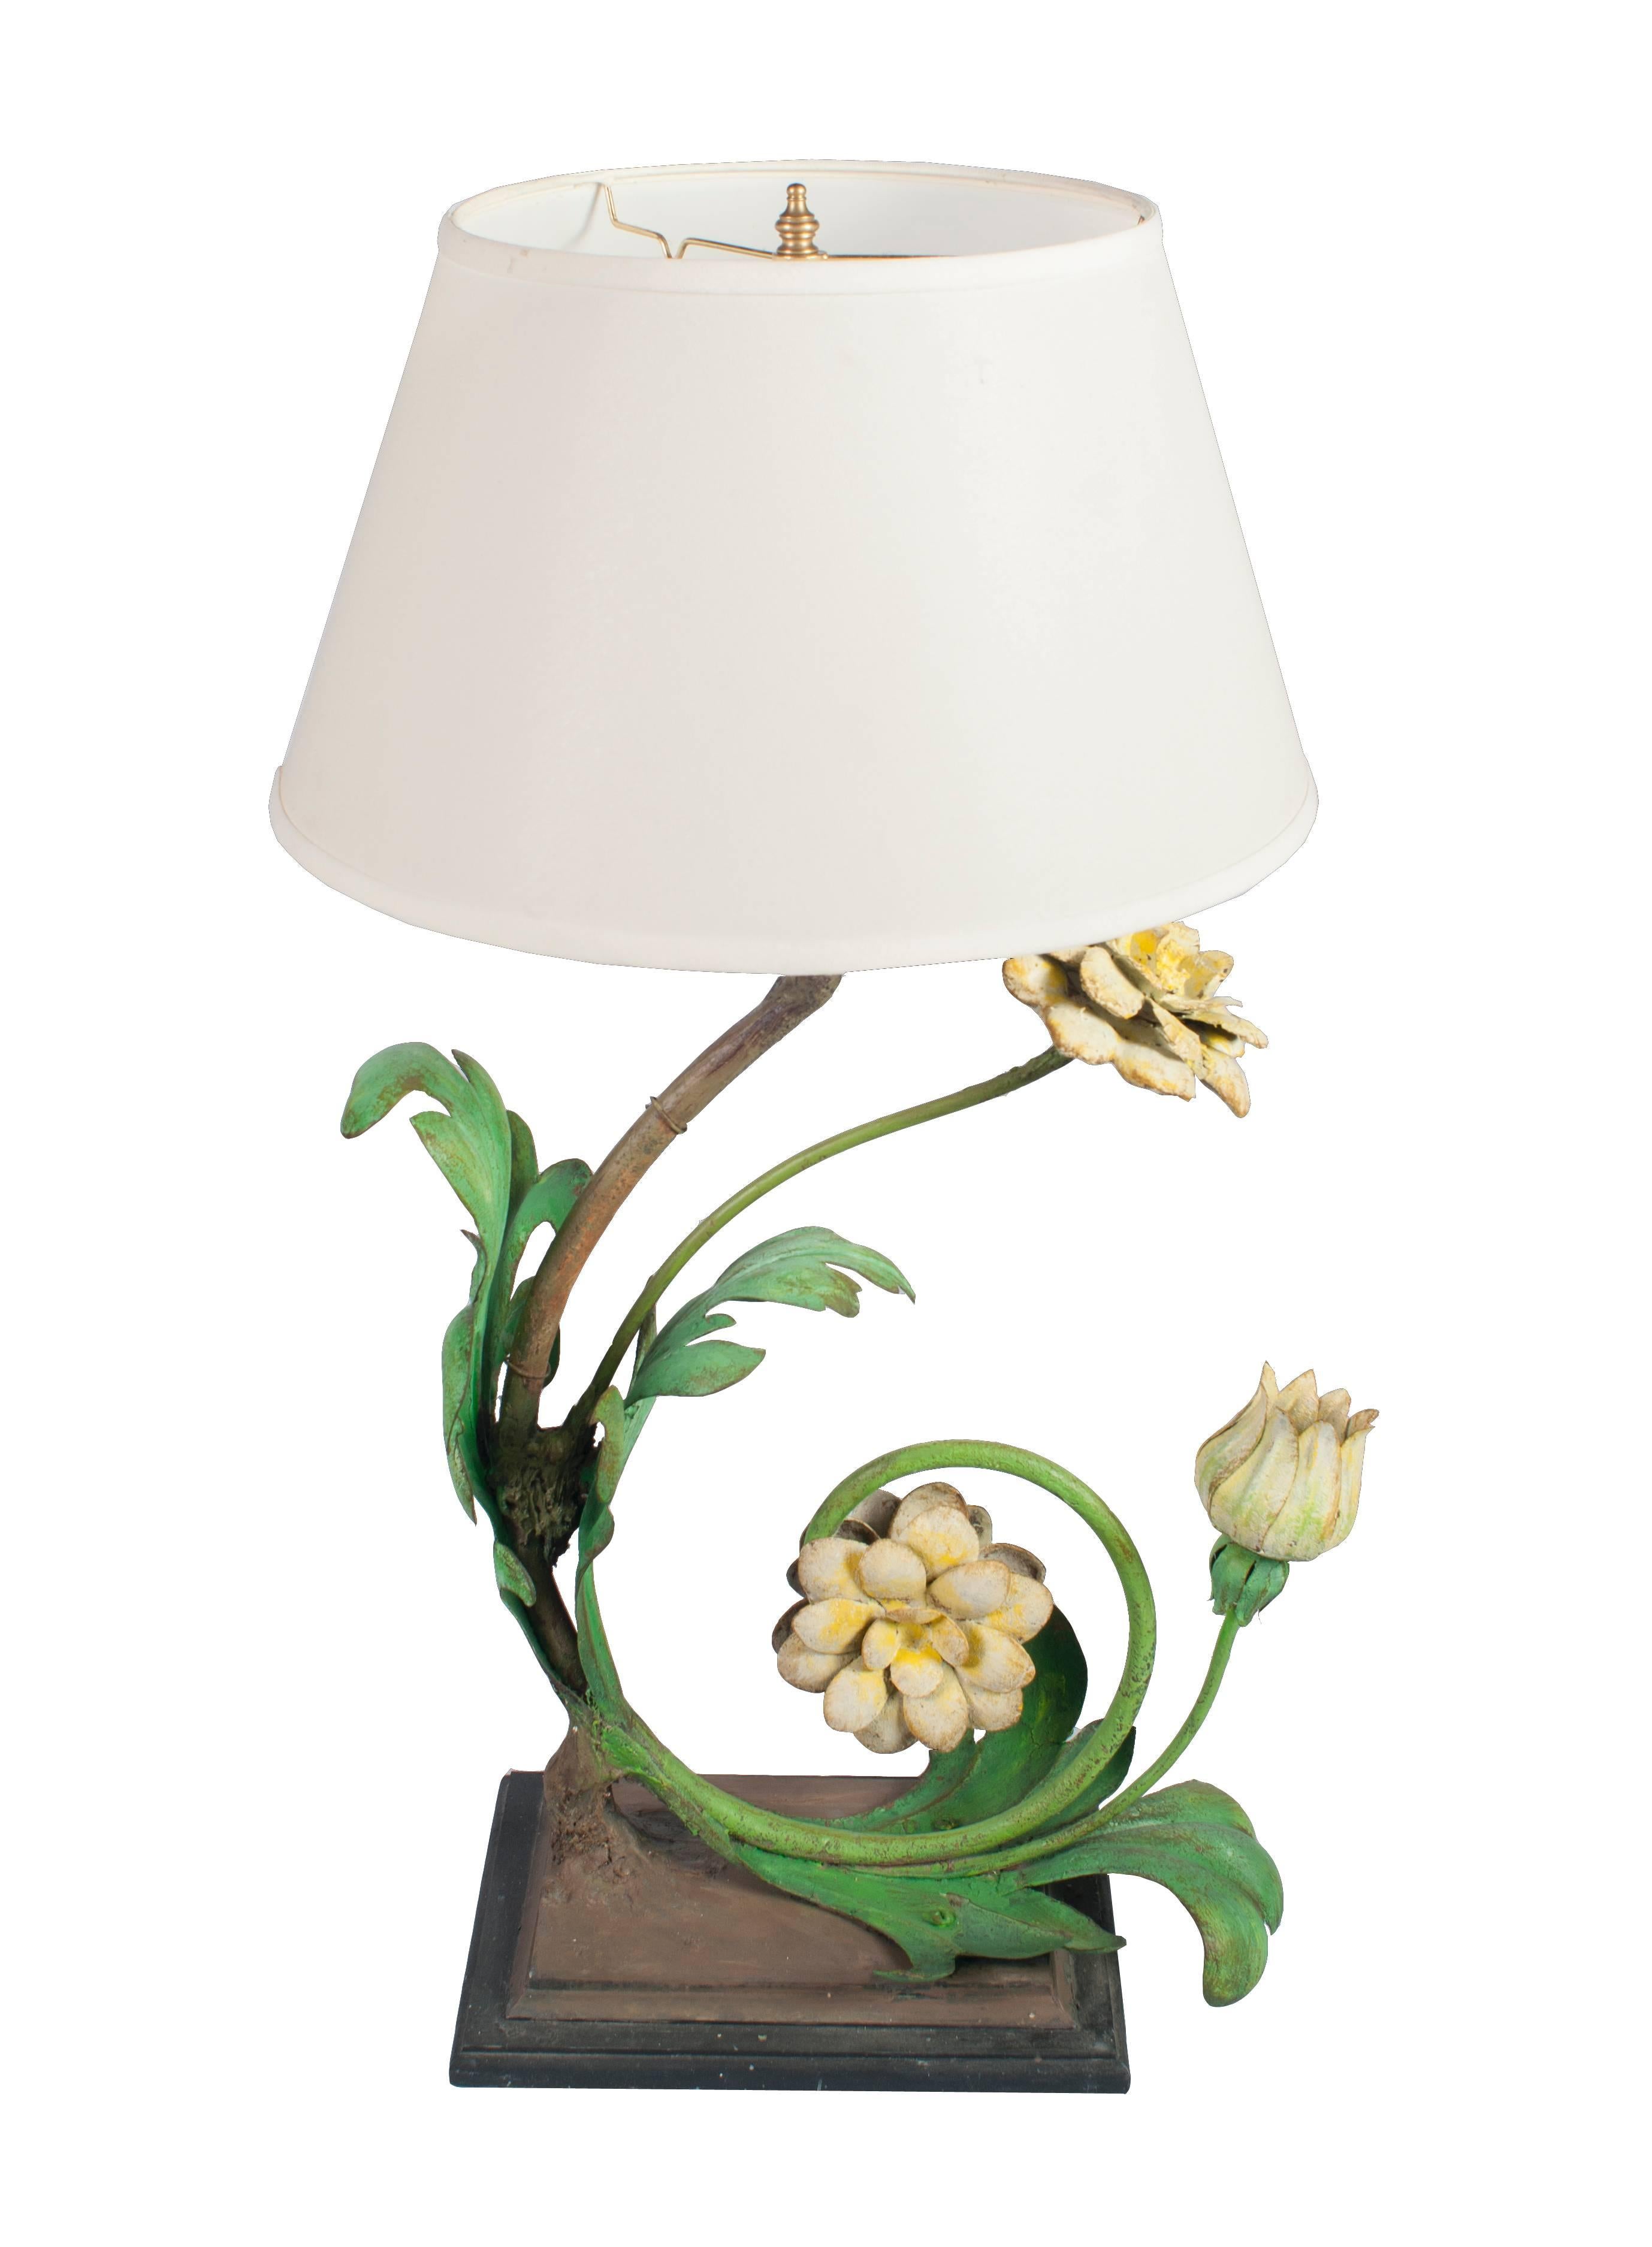 A pair of painted wrought iron table lamps in the form of flowers.

Height is 32